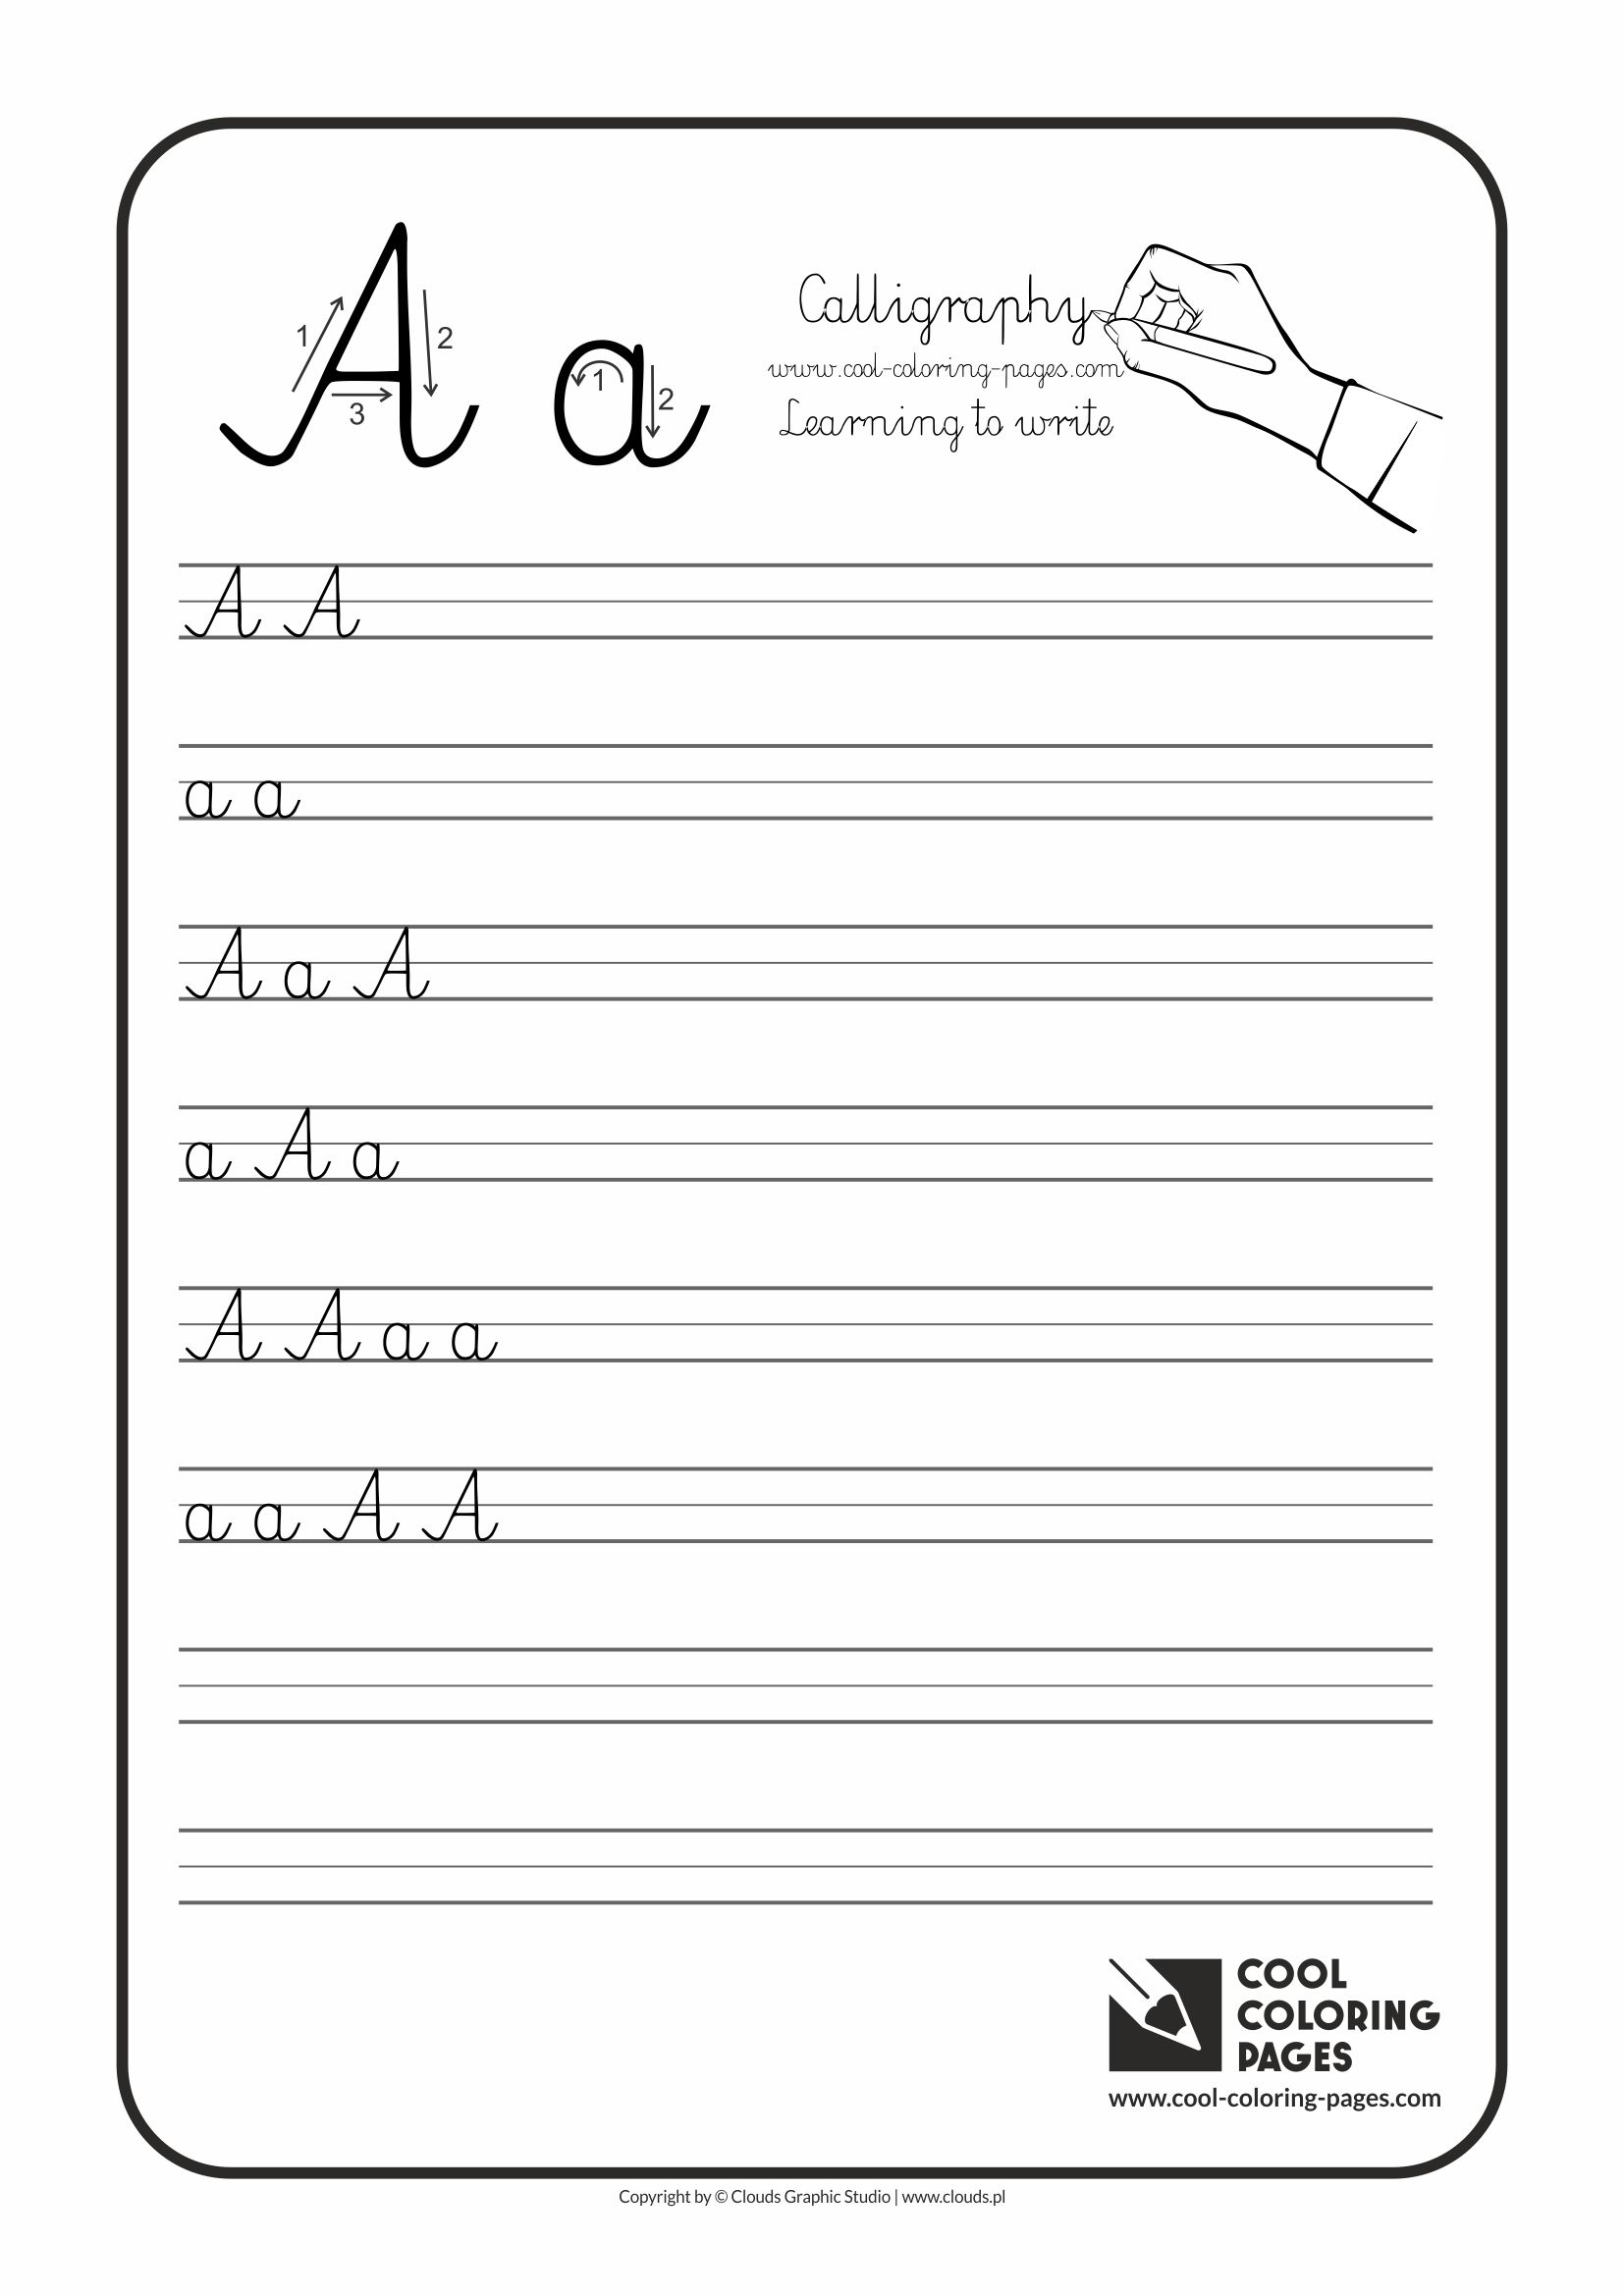 Cool Coloring Pages Letter A - Calligraphy for kids - Cool Coloring